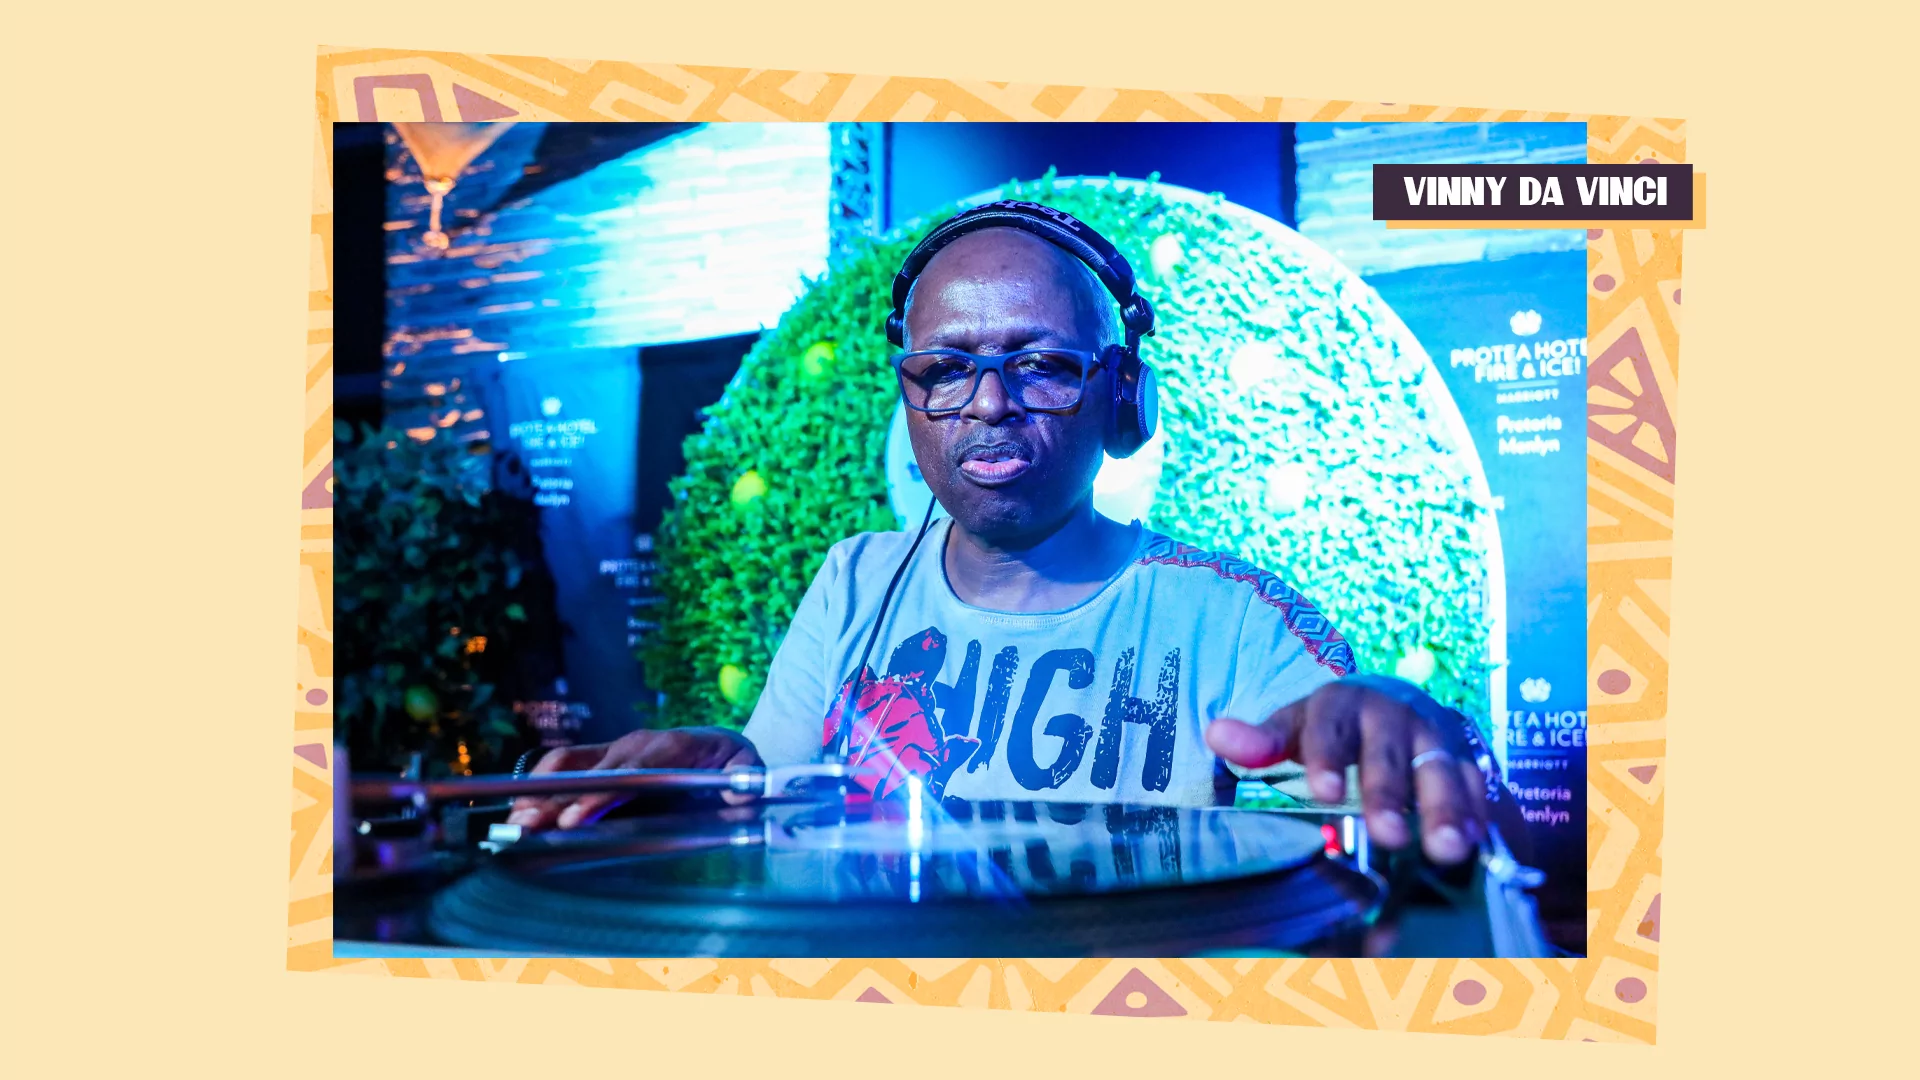 DJ Vinny Da Vinci playing vinyl in a club in front of a green wreath and blue light